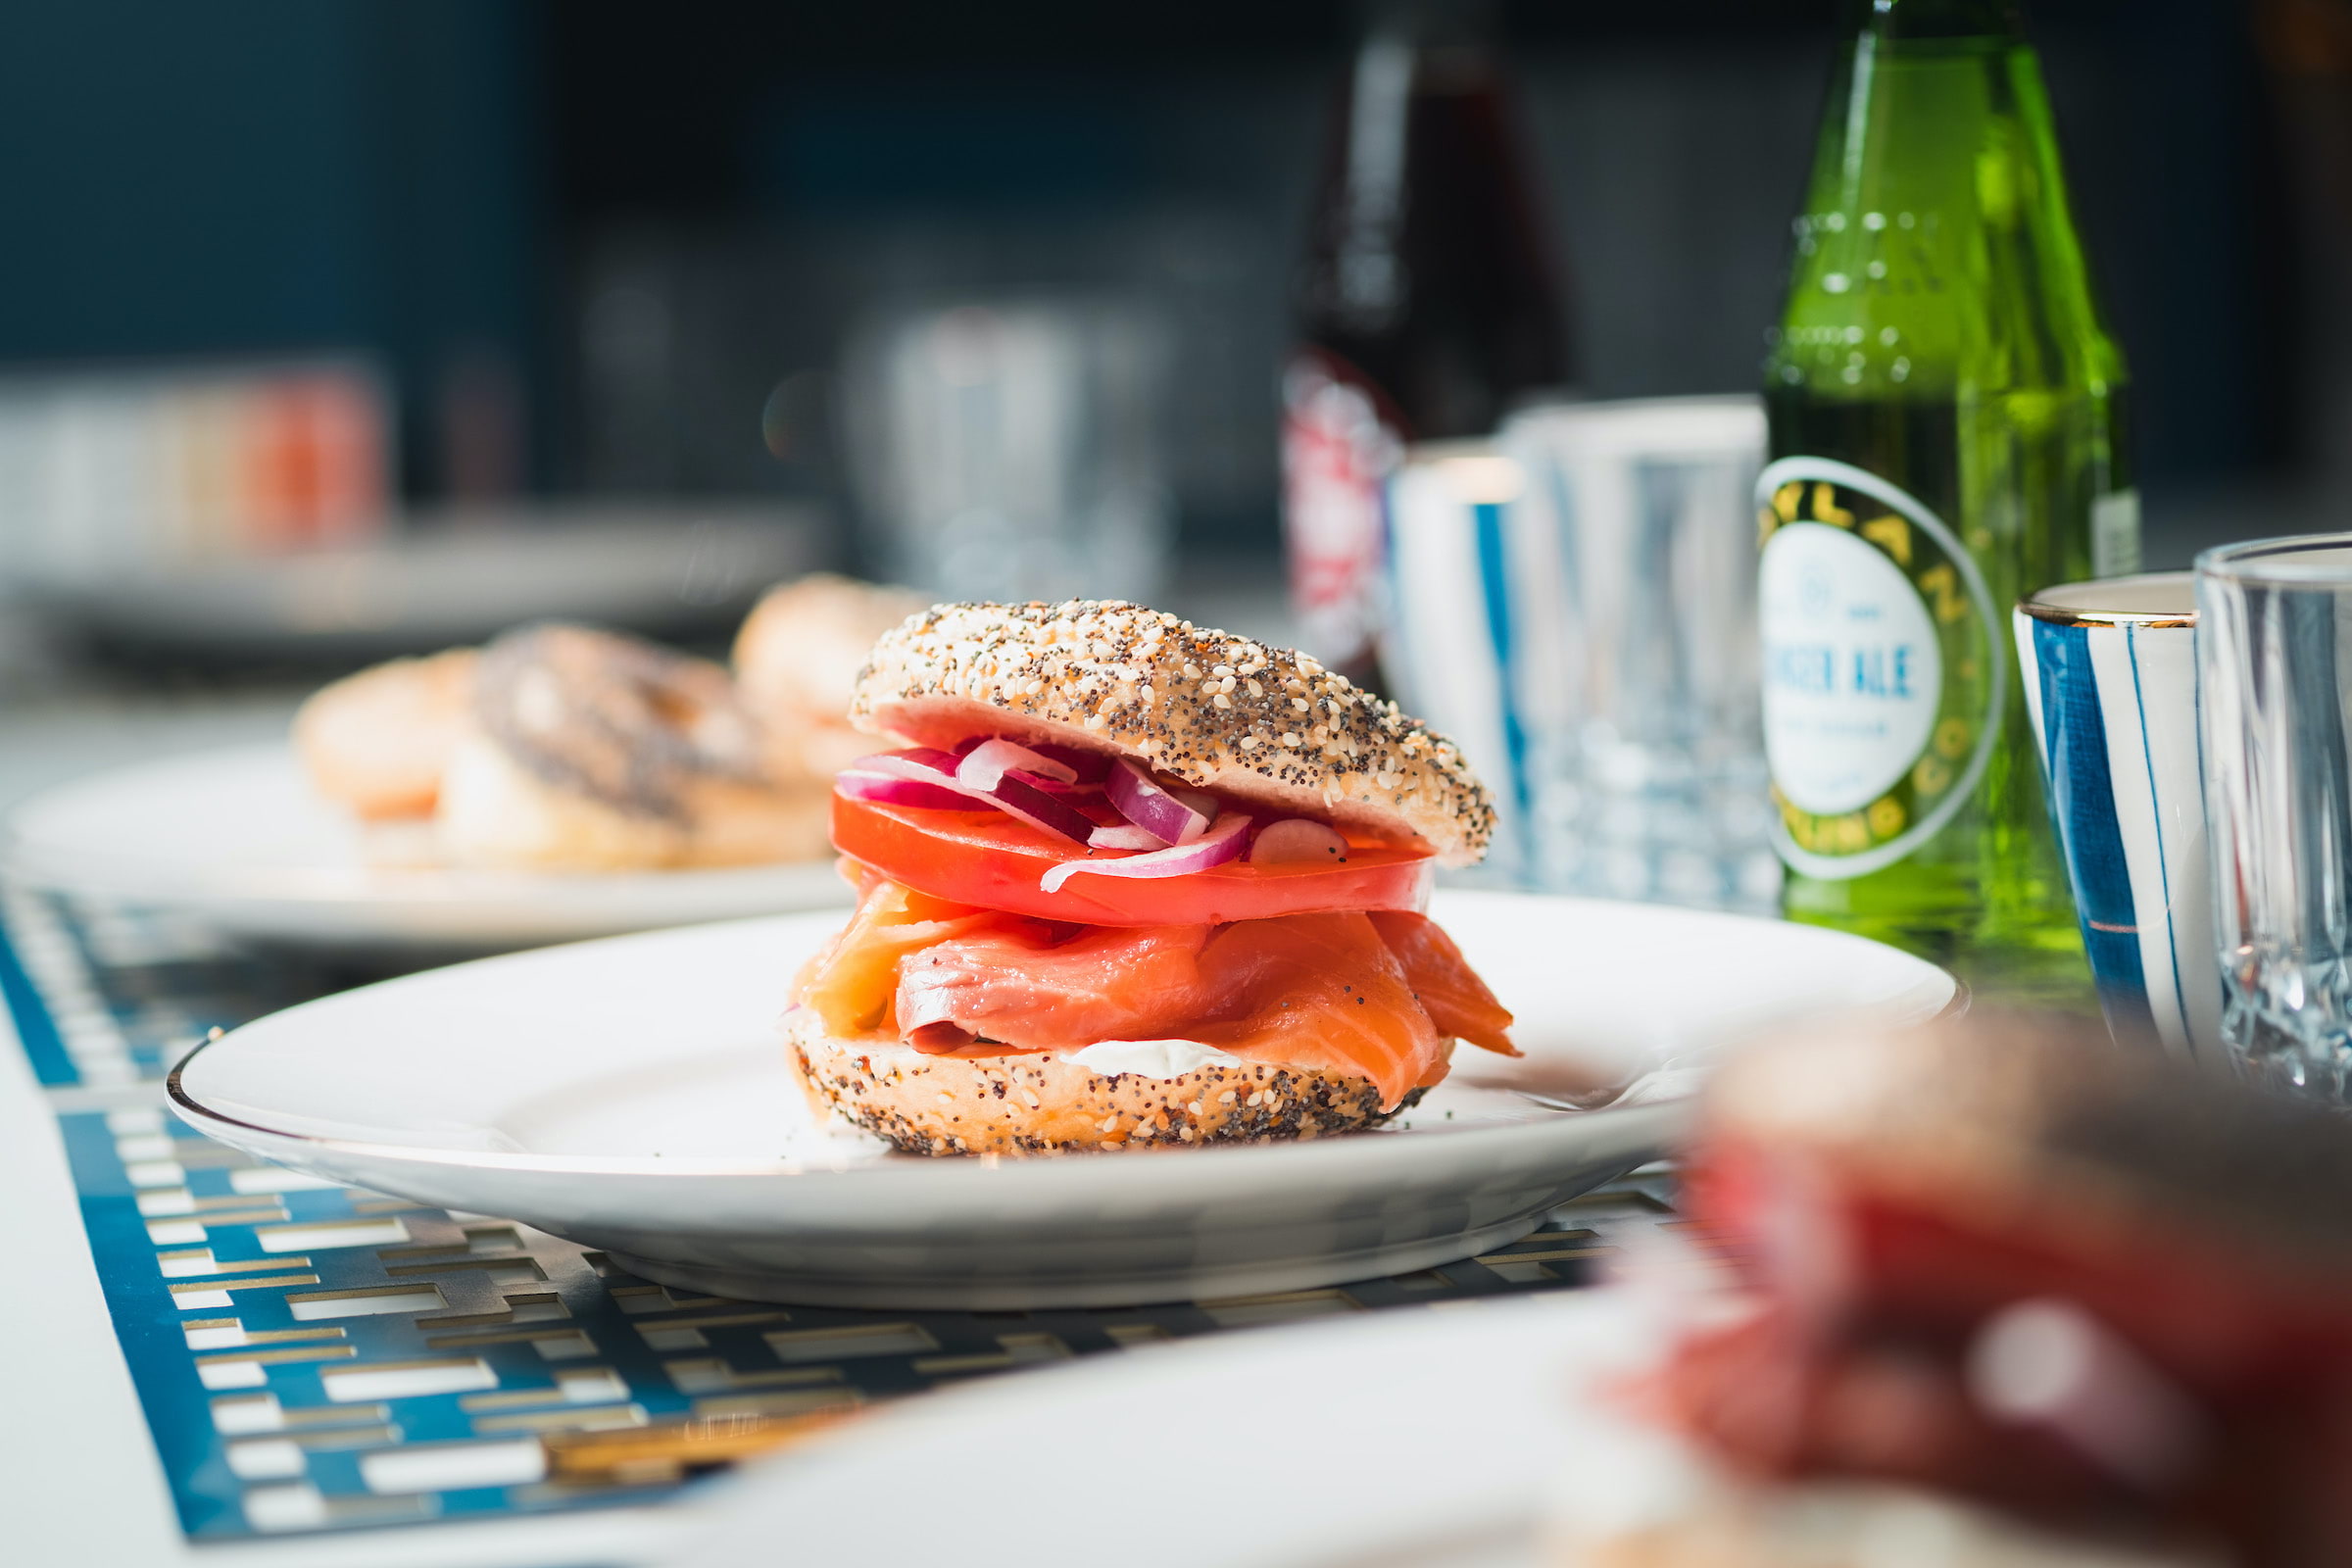 Where to find the best bagels in London